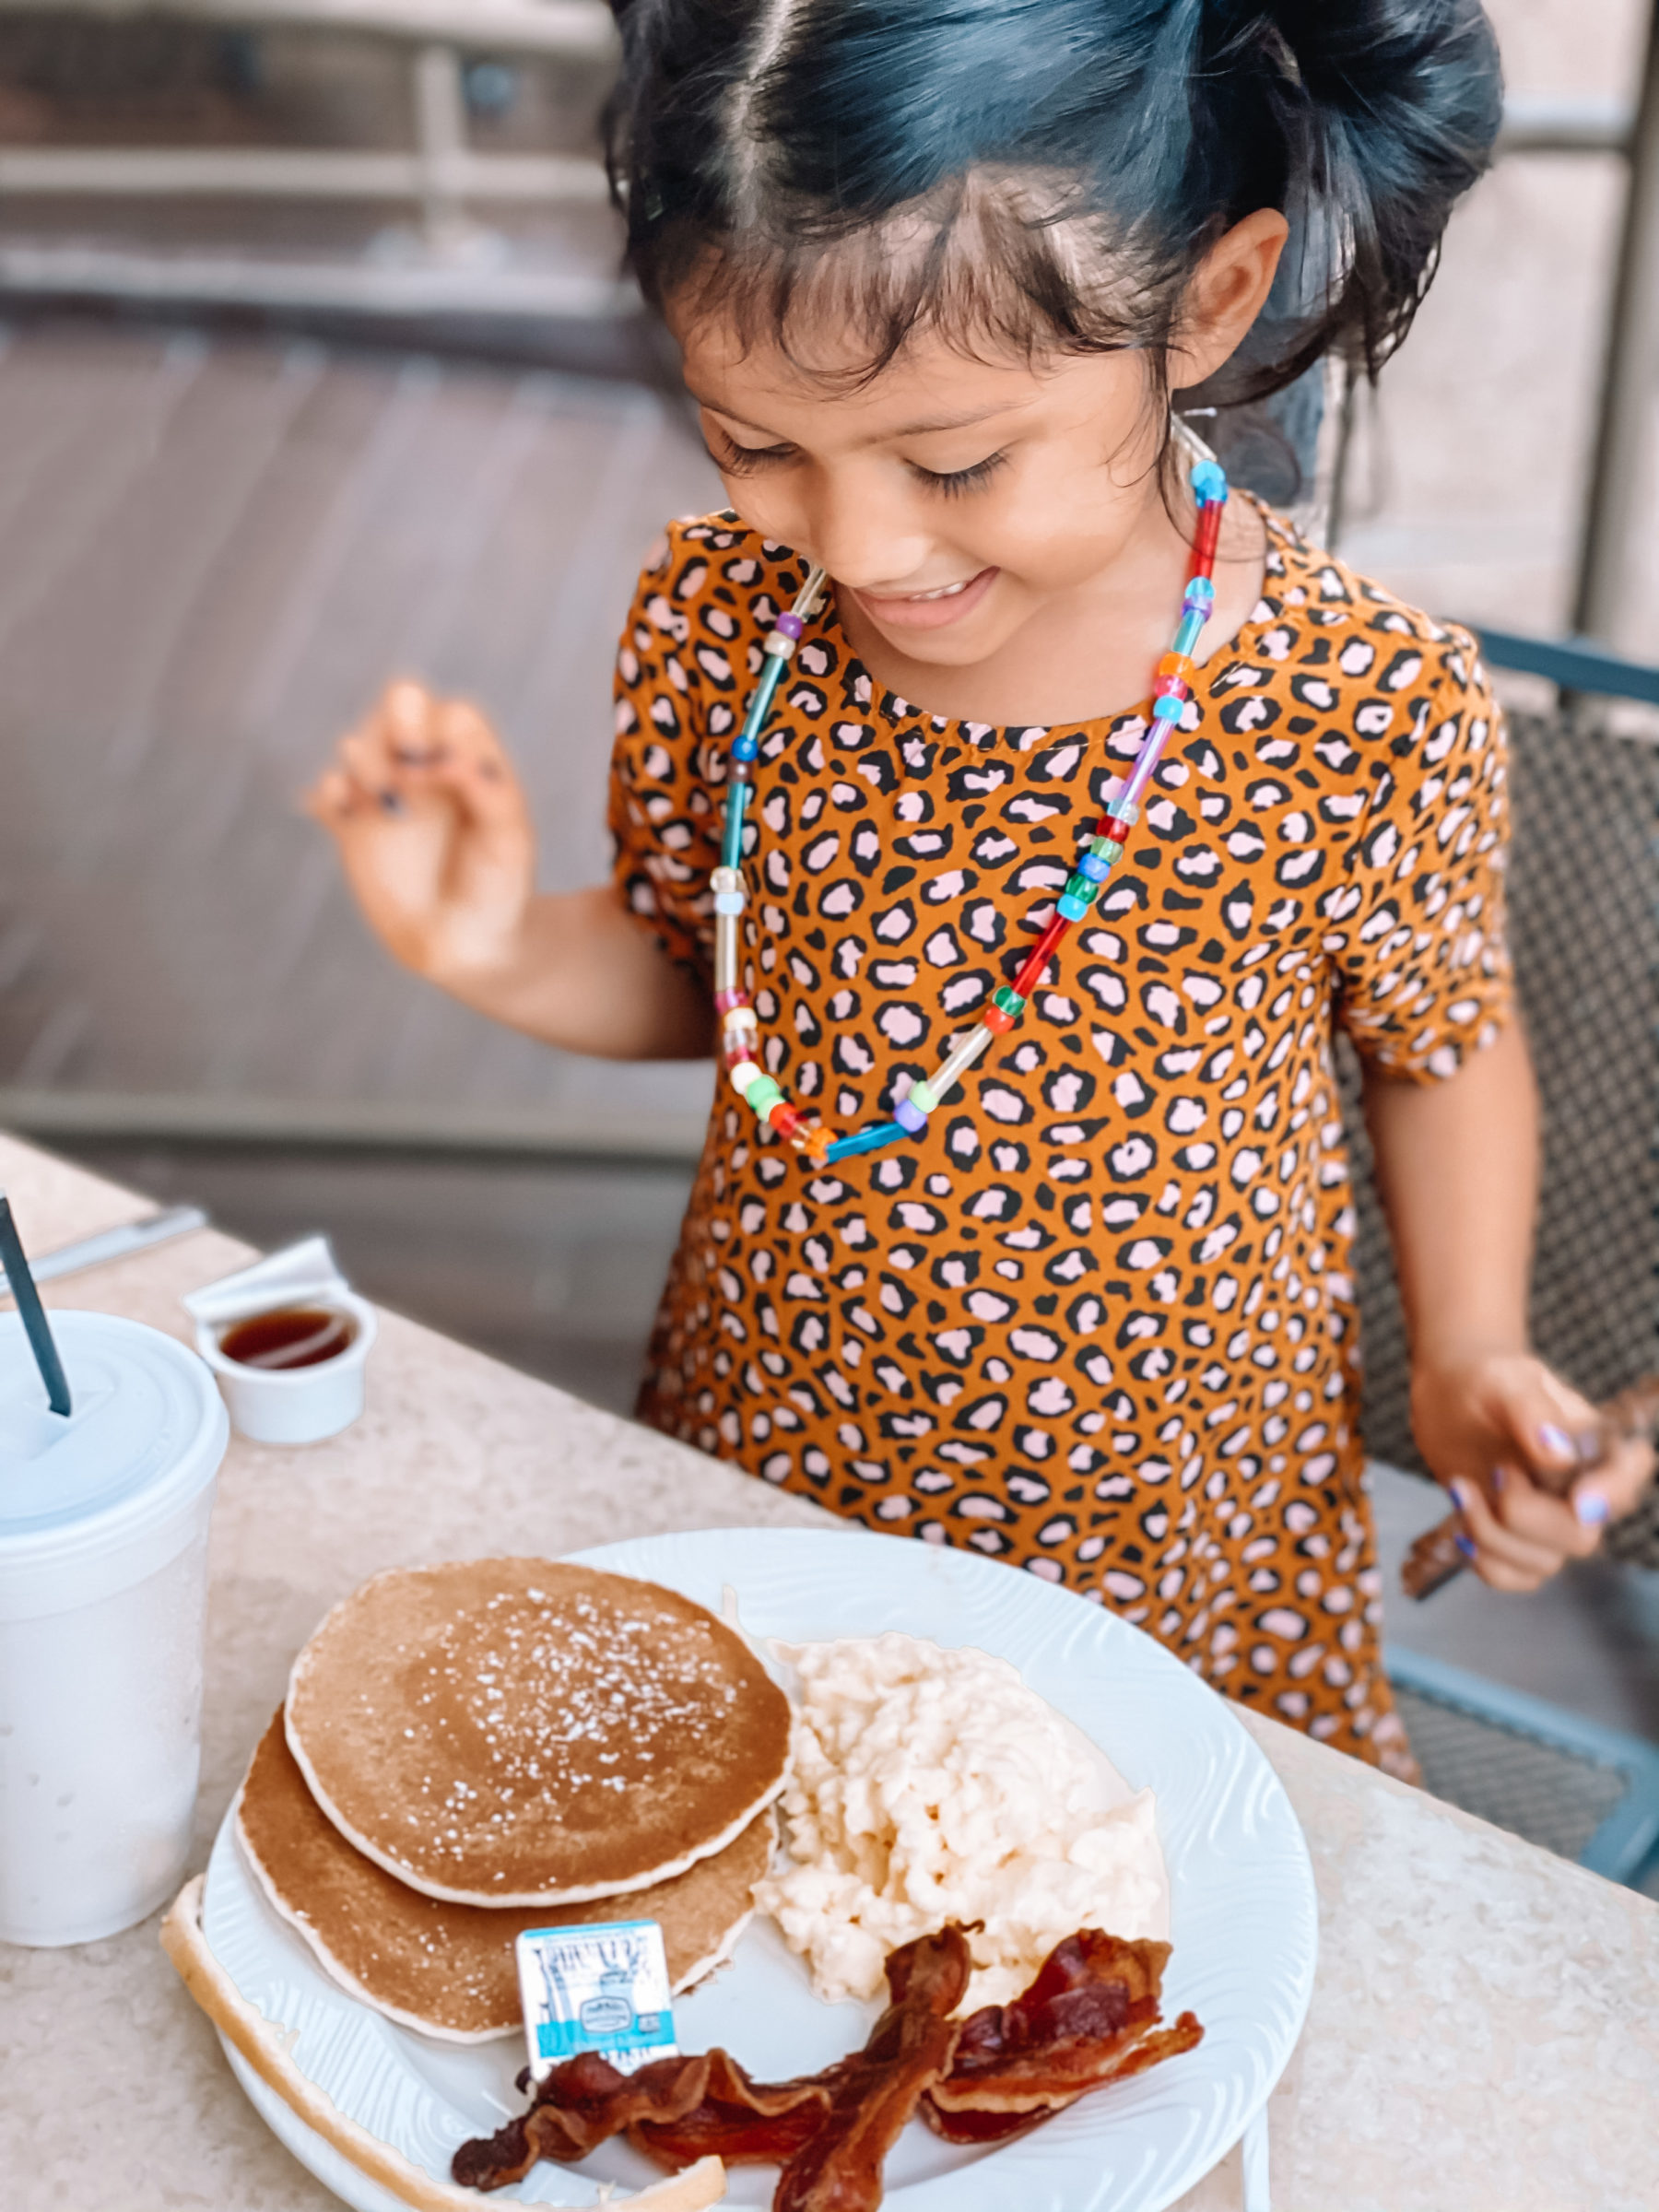 cute & little | dallas family travel blog | san antonio travel guide itinerary | riverwalk The River's Edge Cafe brunch |San Antonio Vacation by popular Dallas travel blog, Cute and Little: image of a girl wearing a leopard print dress and eating pancakes, eggs, and bacon at The River's Edge Cafe.